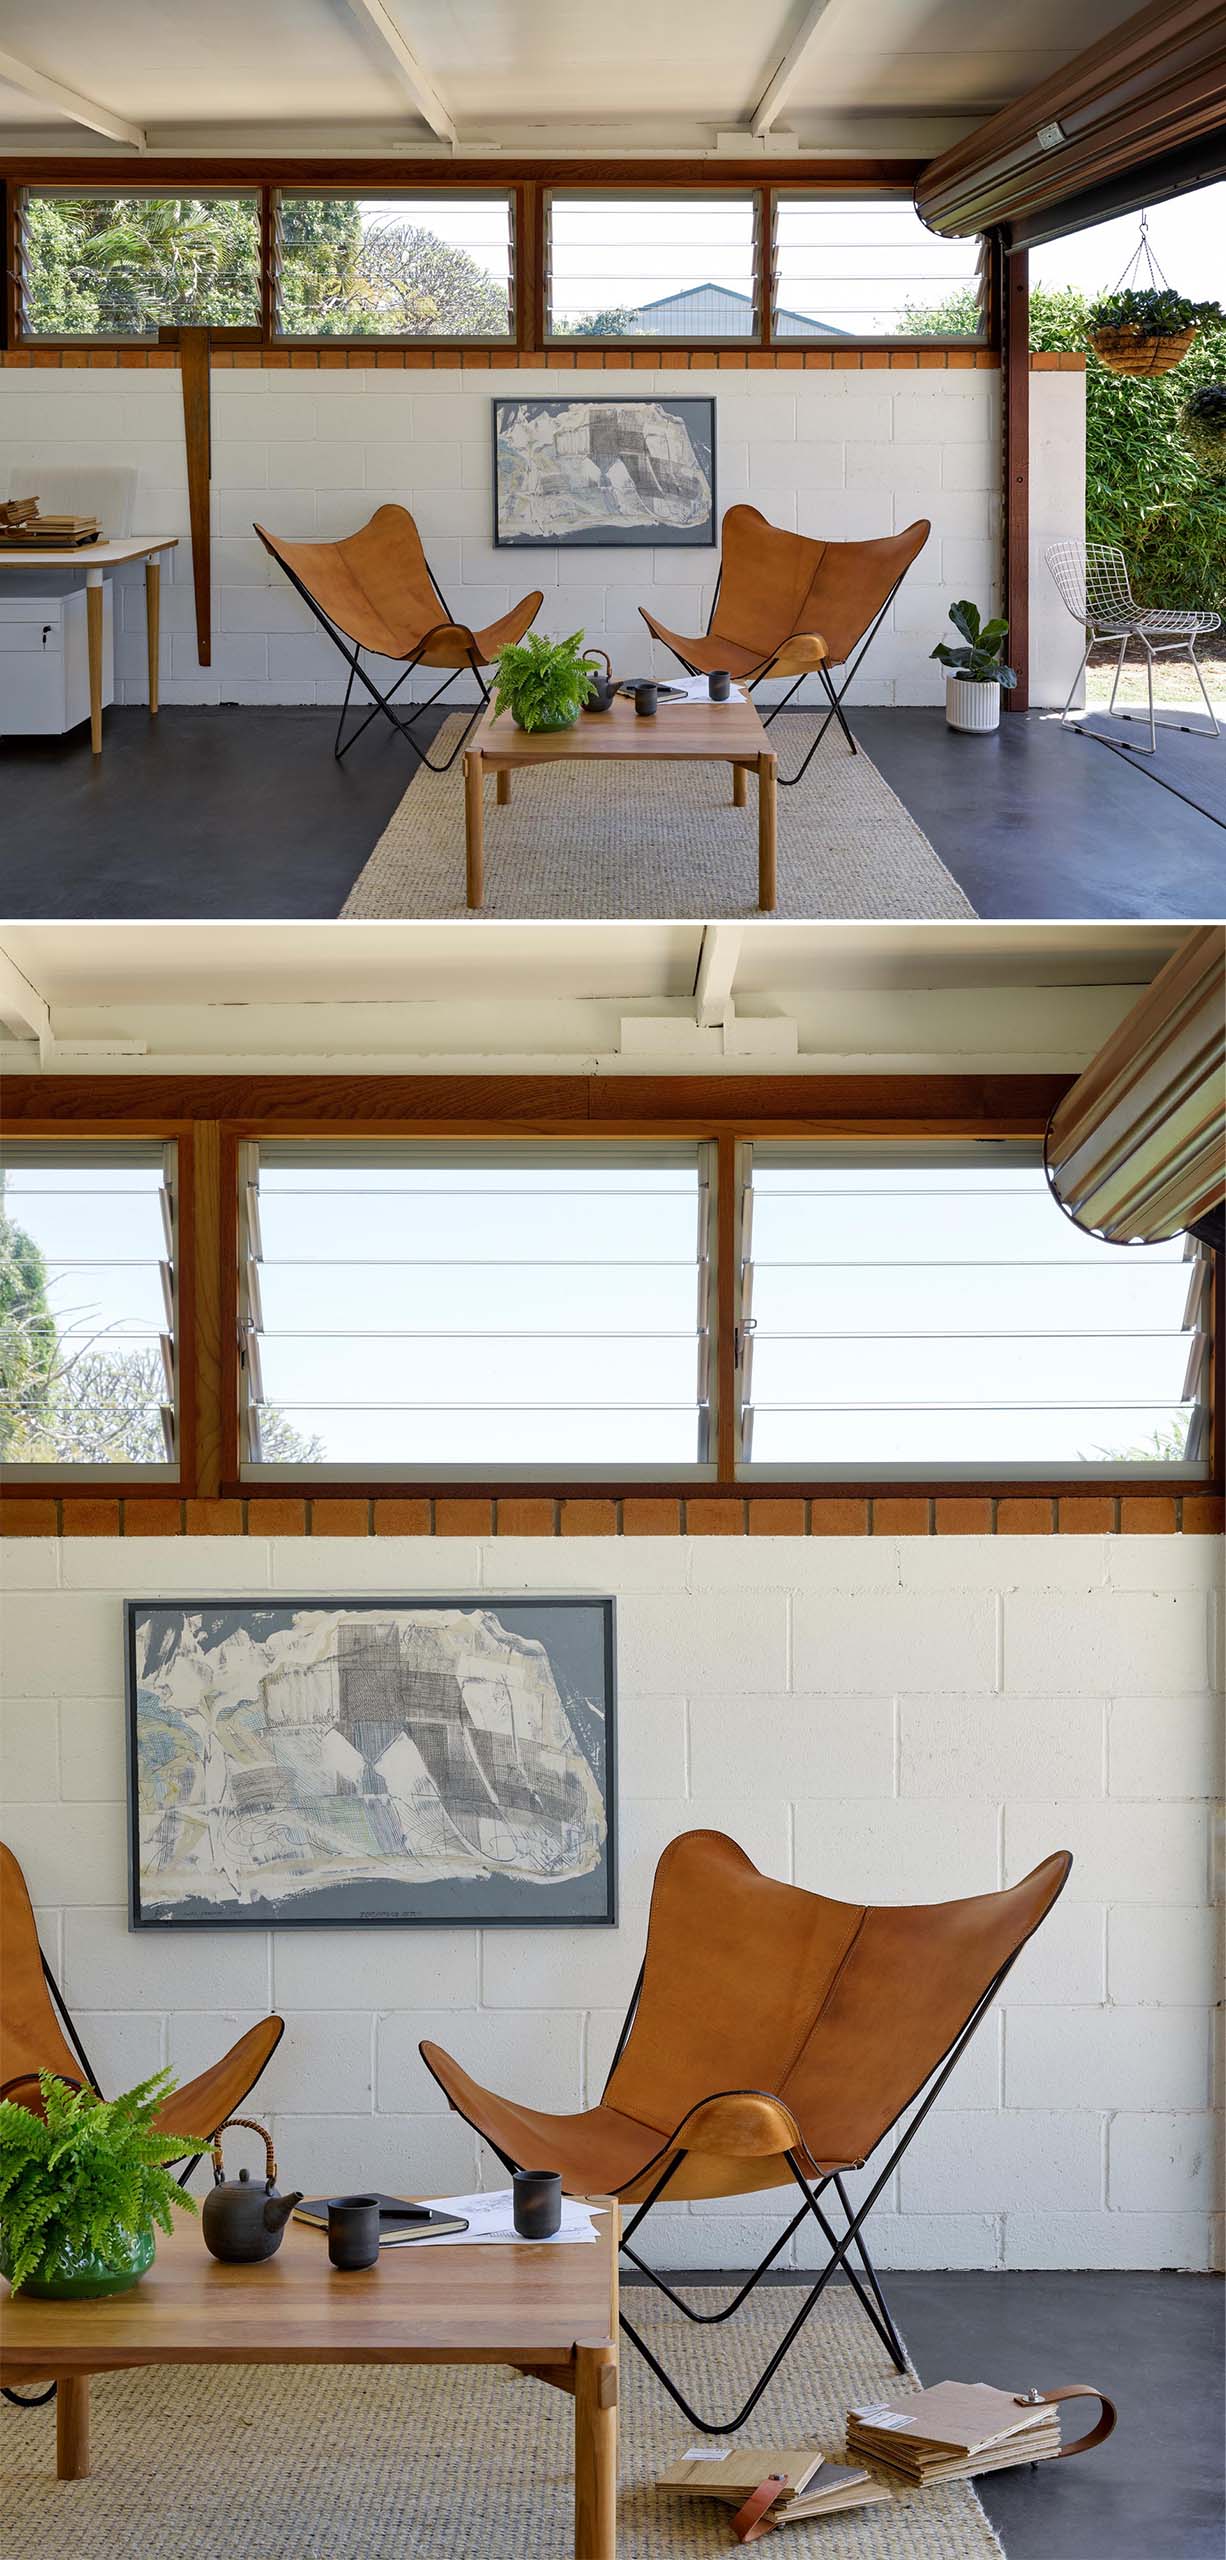 The white block walls of this concerted carport are contrasted by the brown leather chairs, wood coffee table, and dark concrete flooring.